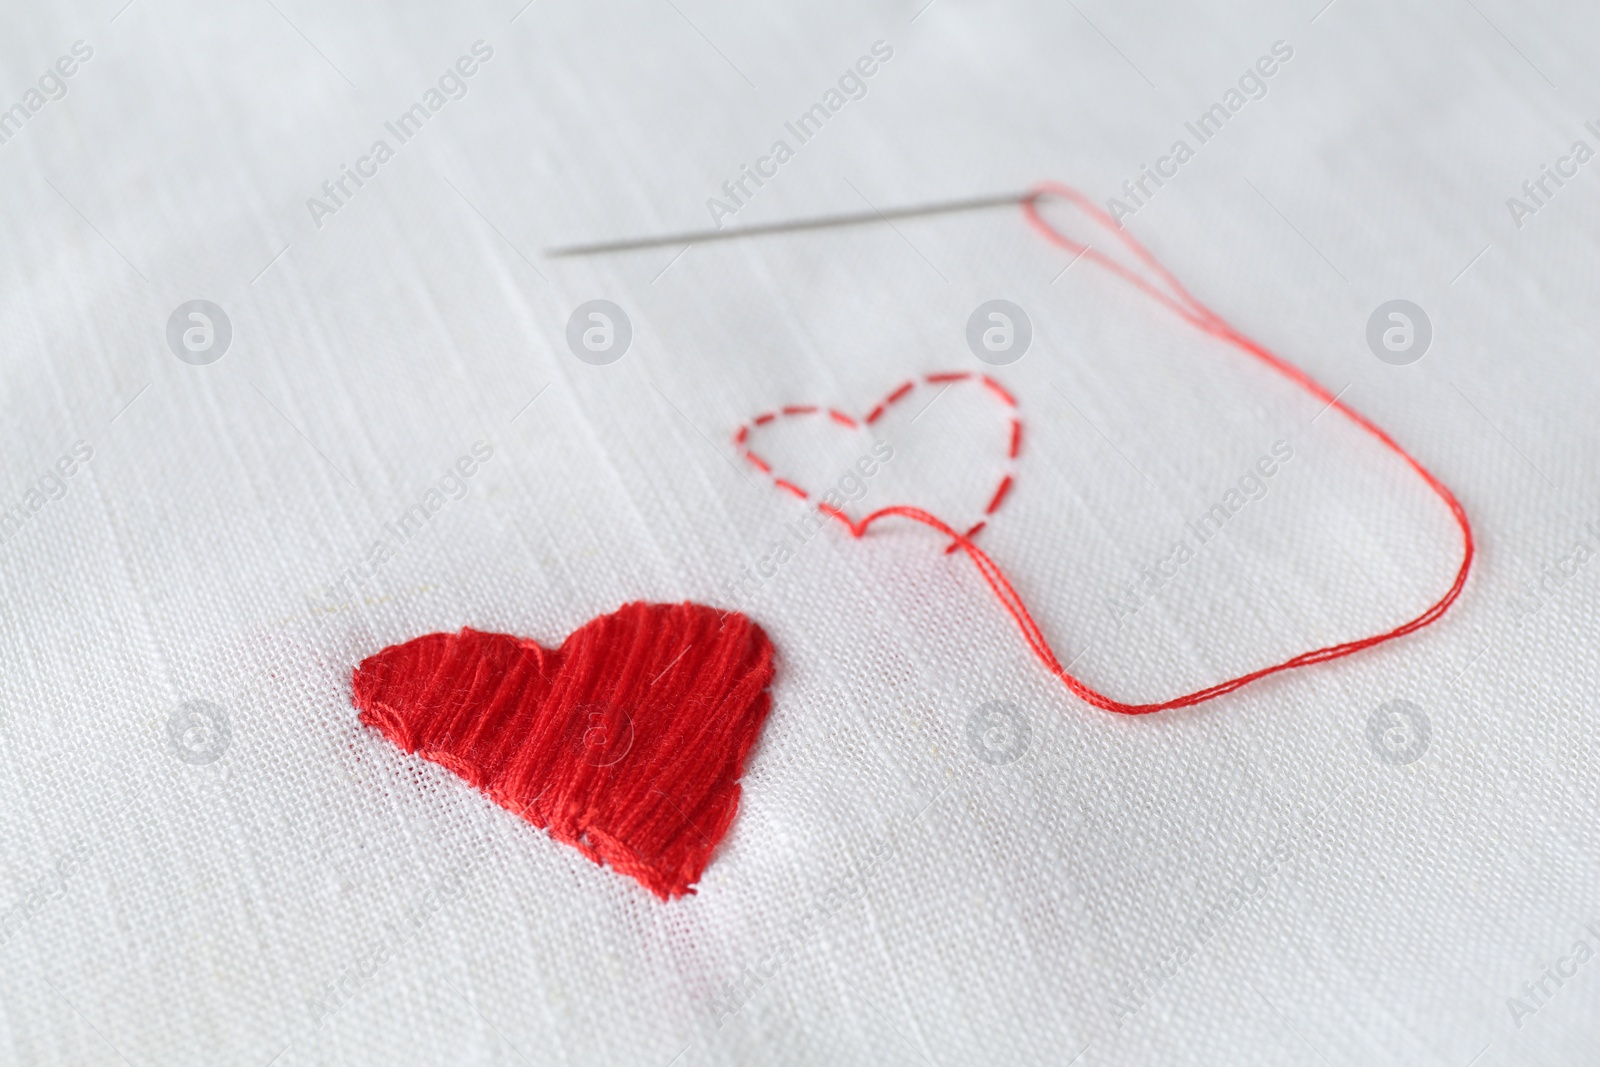 Photo of Embroidered red heart and needle on white cloth, closeup